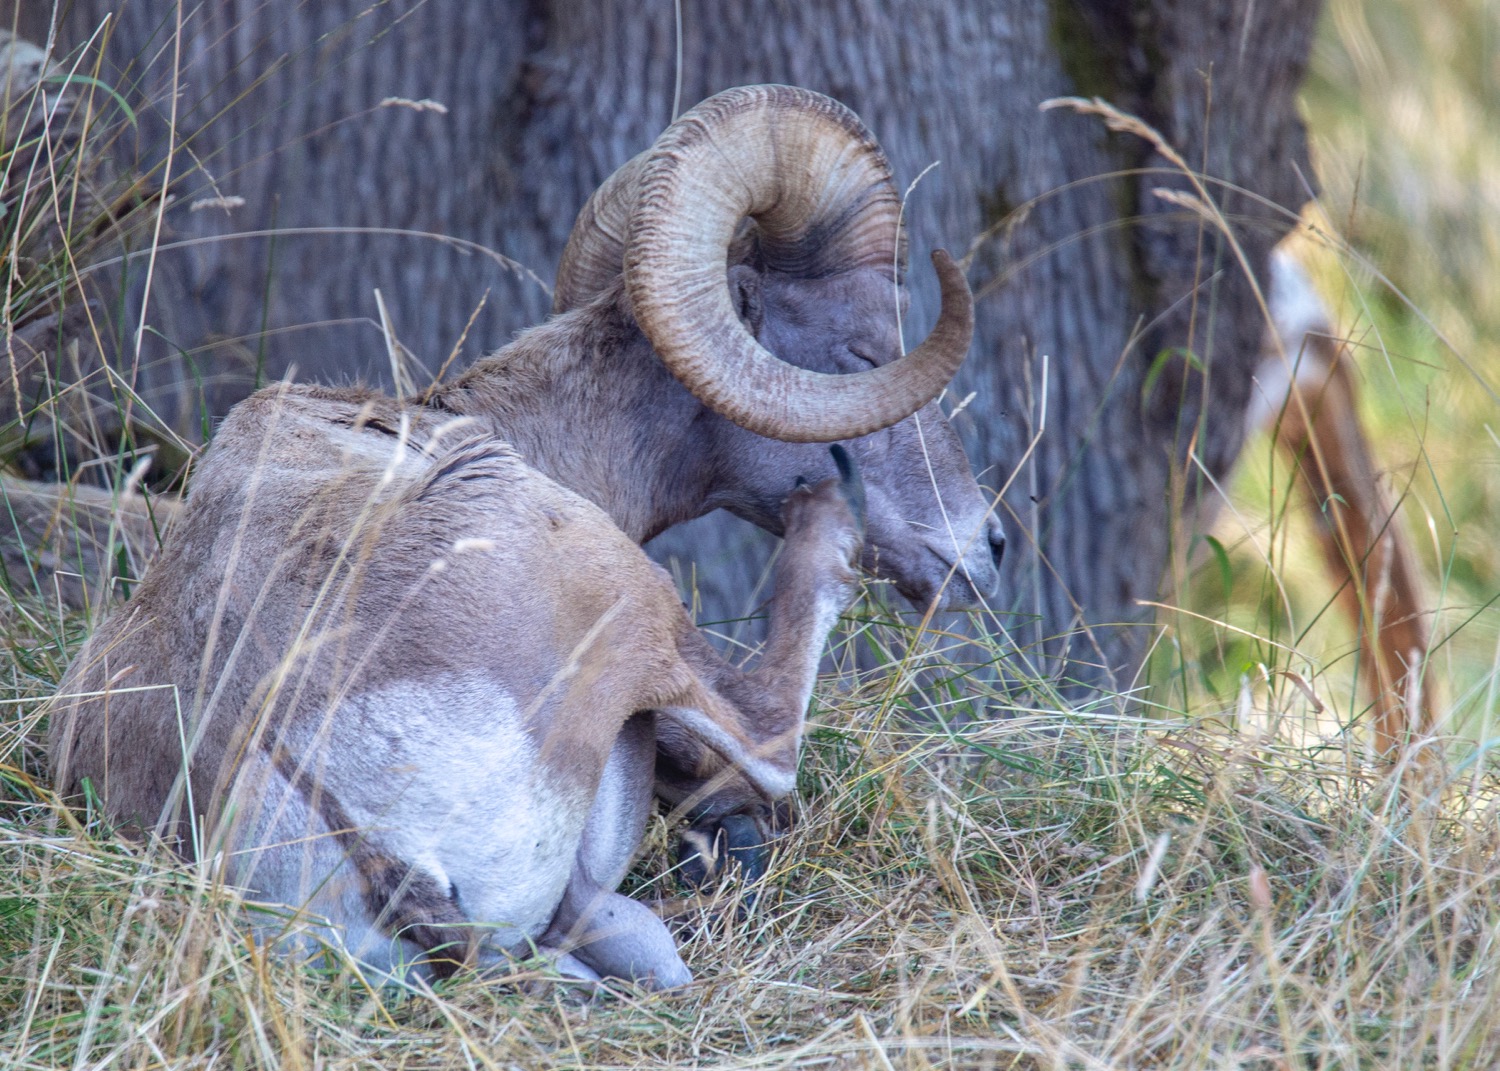  The bighorn sheep were also trying to stay cool in the shade. 